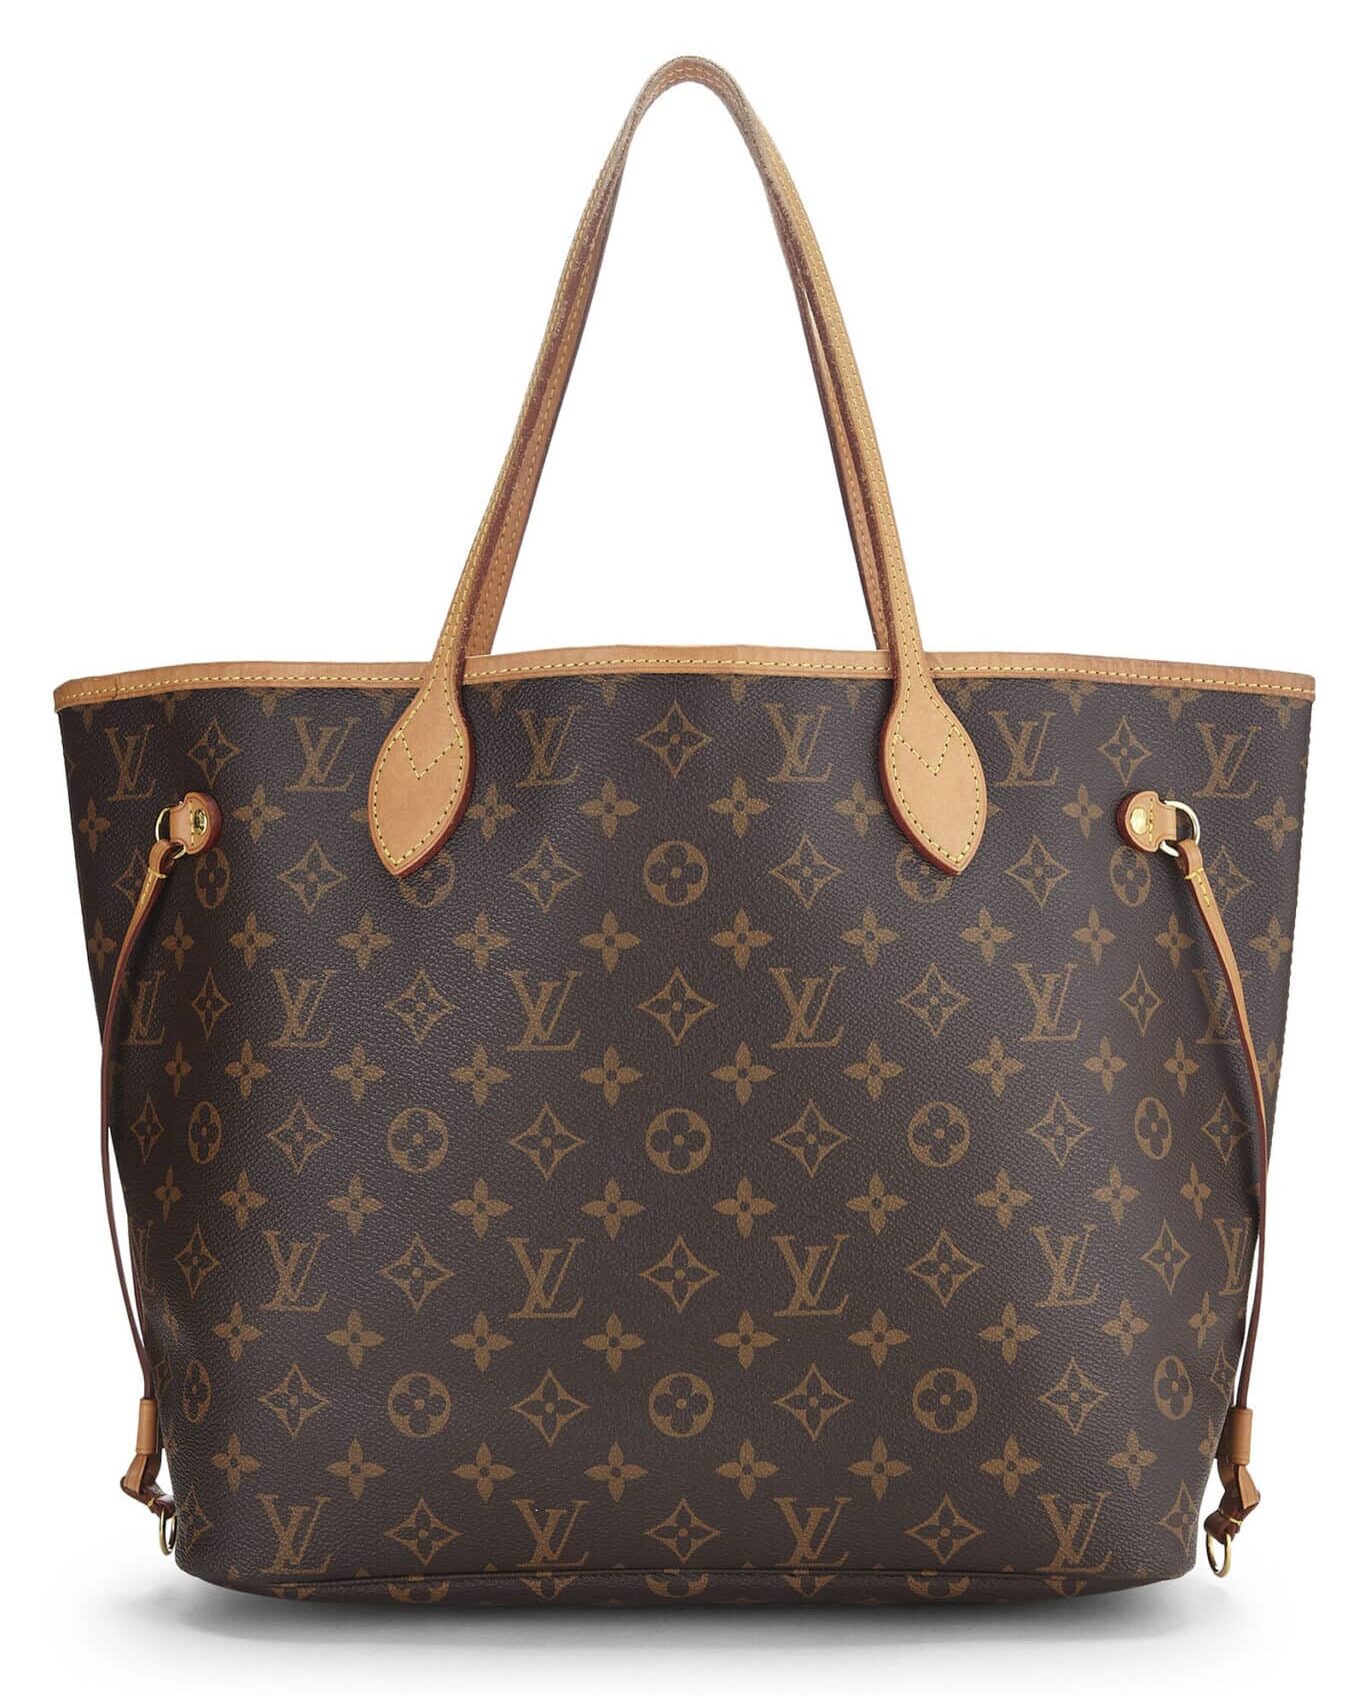 Best Louis Vuitton Dupe Bags: The Ultimate LV Dupe Guide